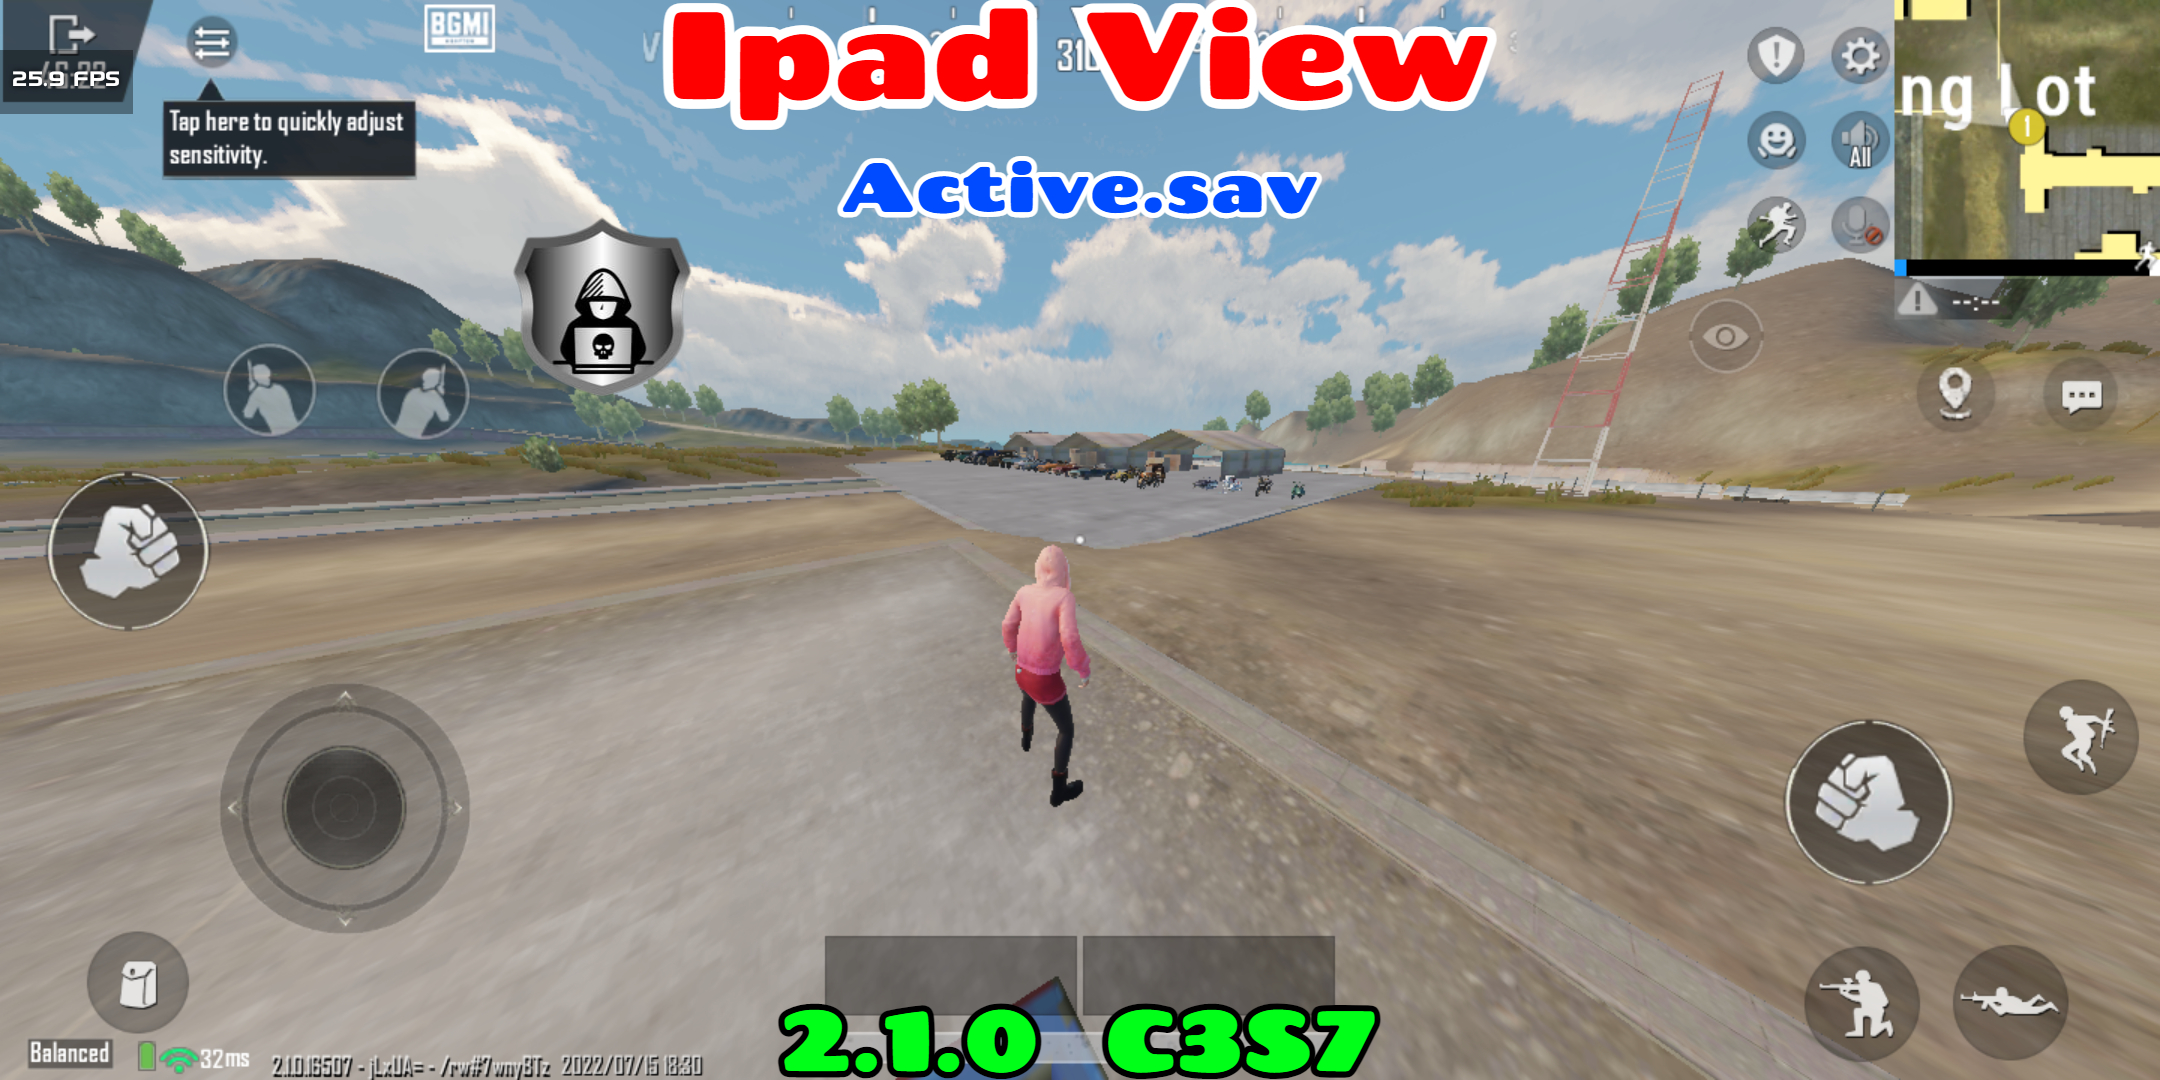 You are currently viewing PUBG 2.1 Ipad View Hack File Active.sav Download C3S7